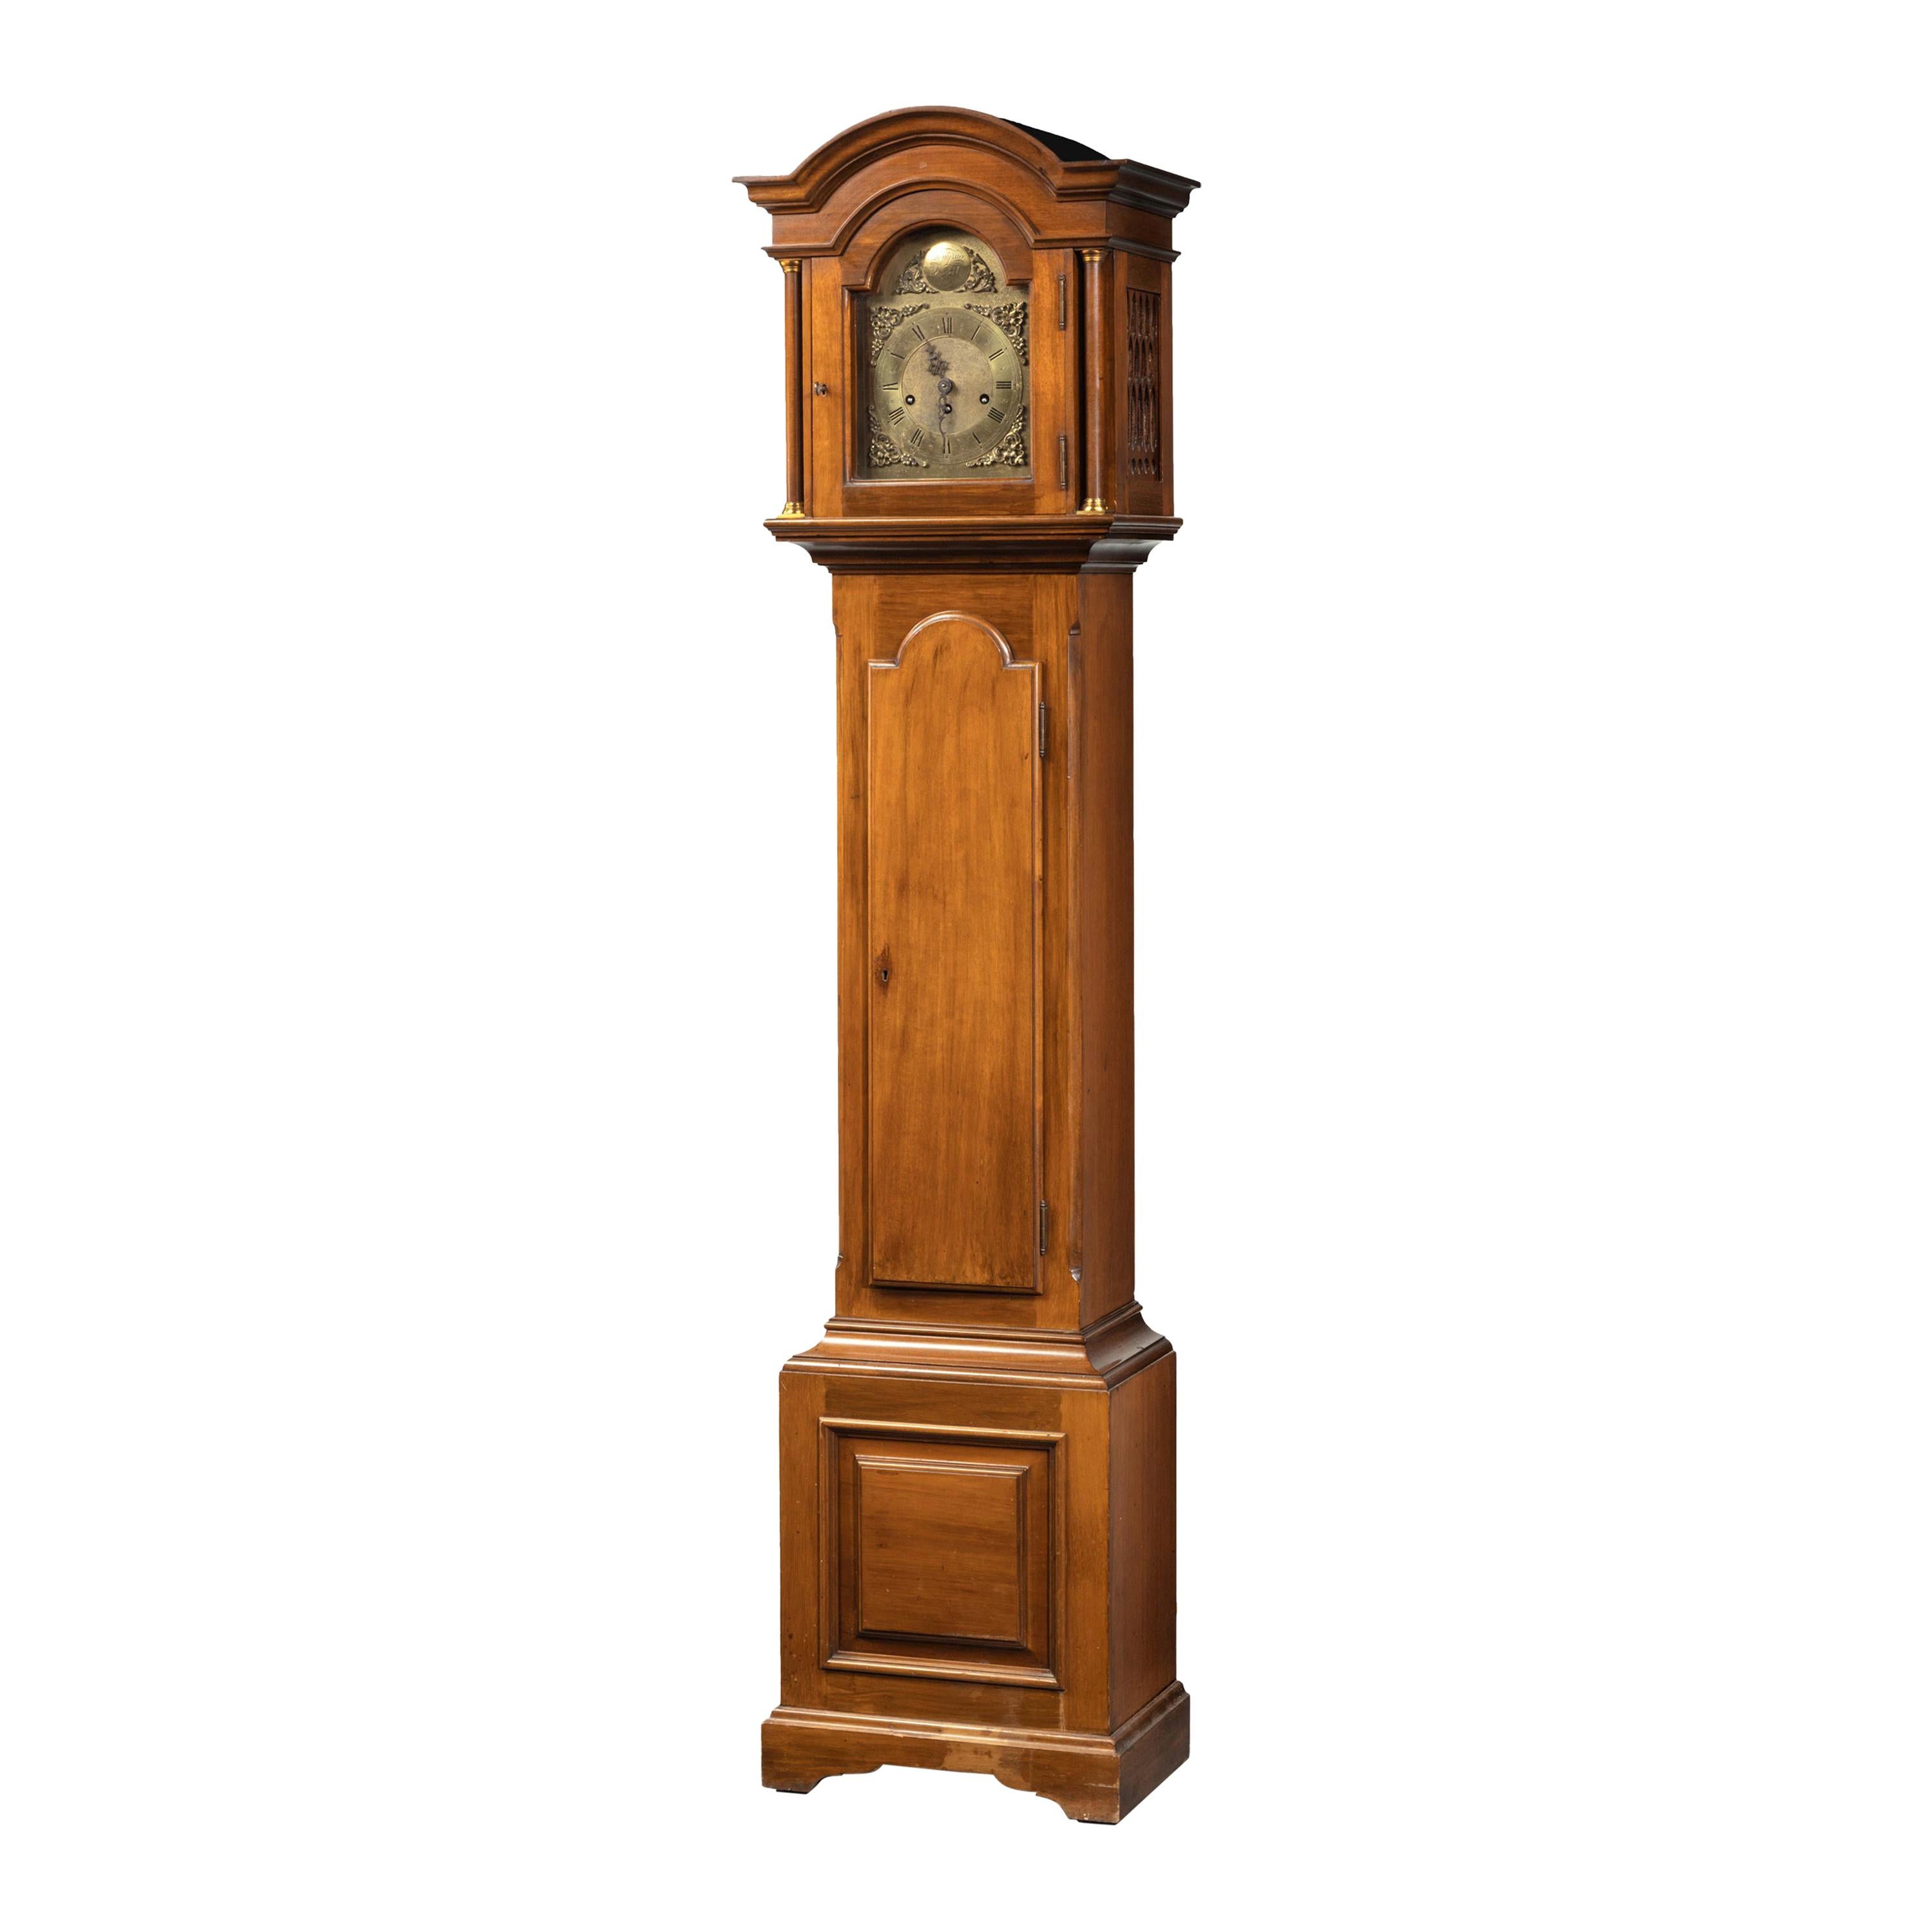 Most Attractive Early 20th Century Walnut Grandmother Clock